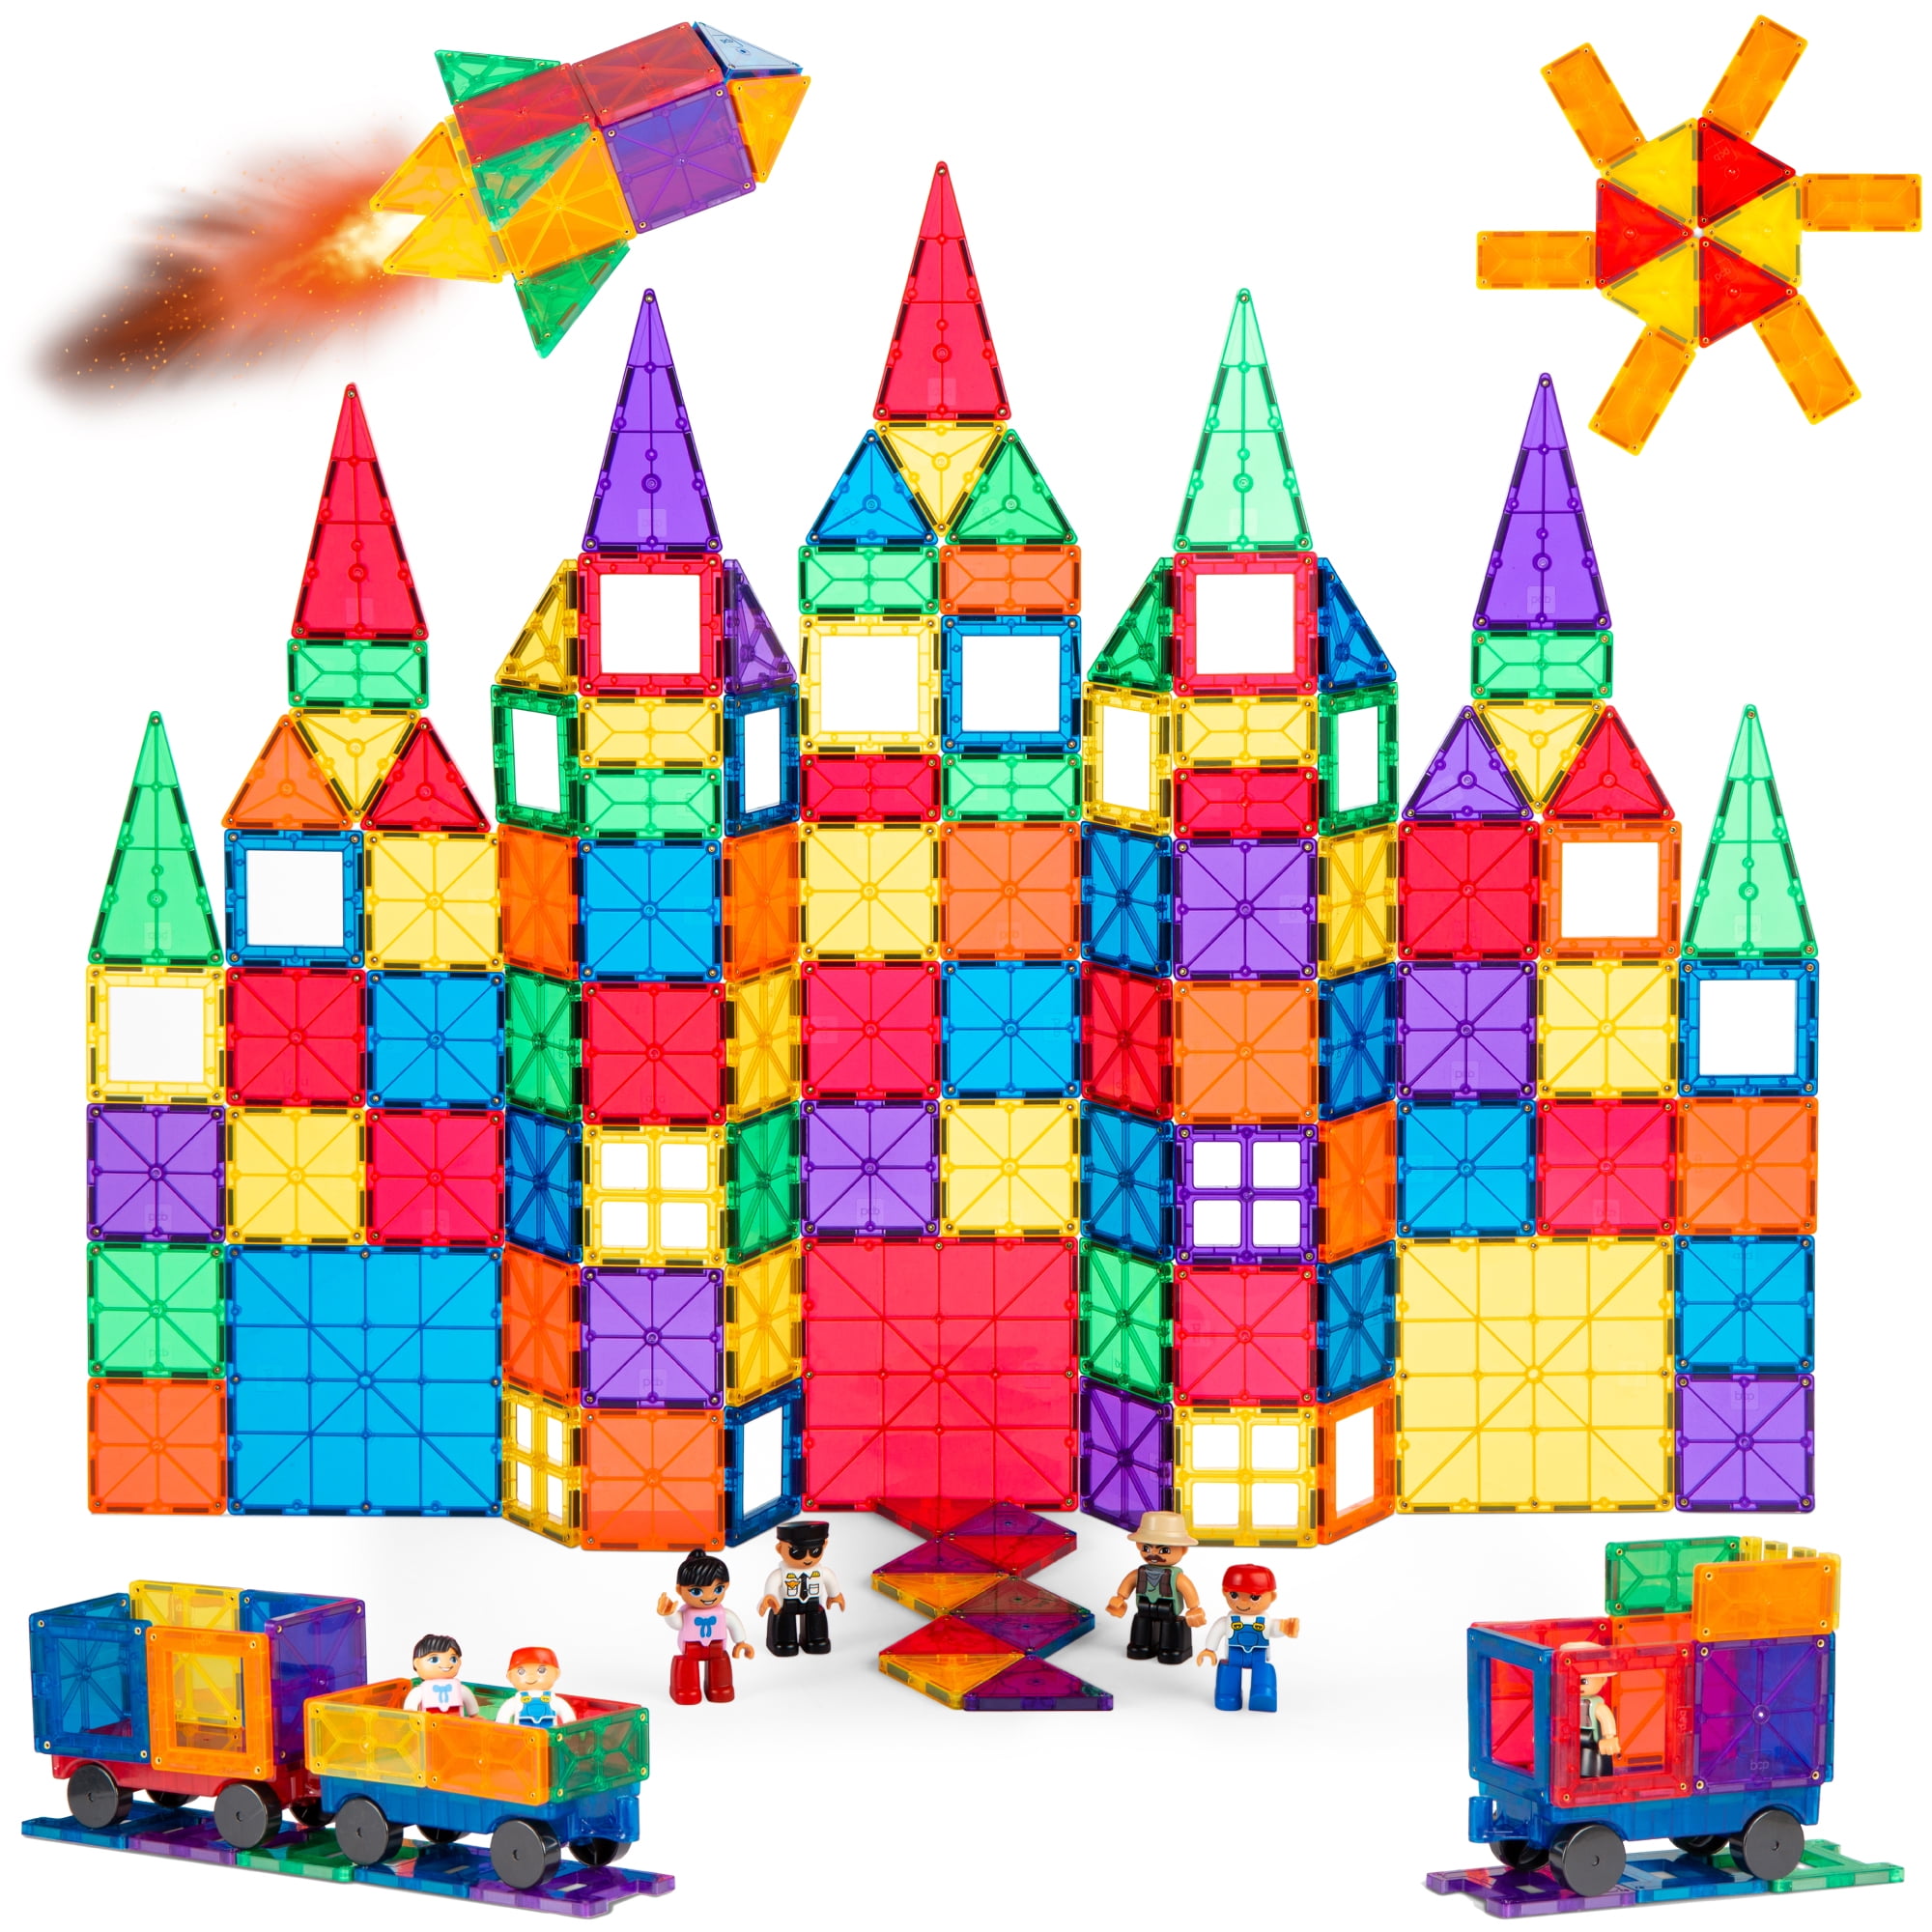 Magnetic Toys for 3 4 5 Year Old Kids Boys Girls Magnetic Building Blocks Tiles Set STEM Educational Construction Toys Gifts 64PCS